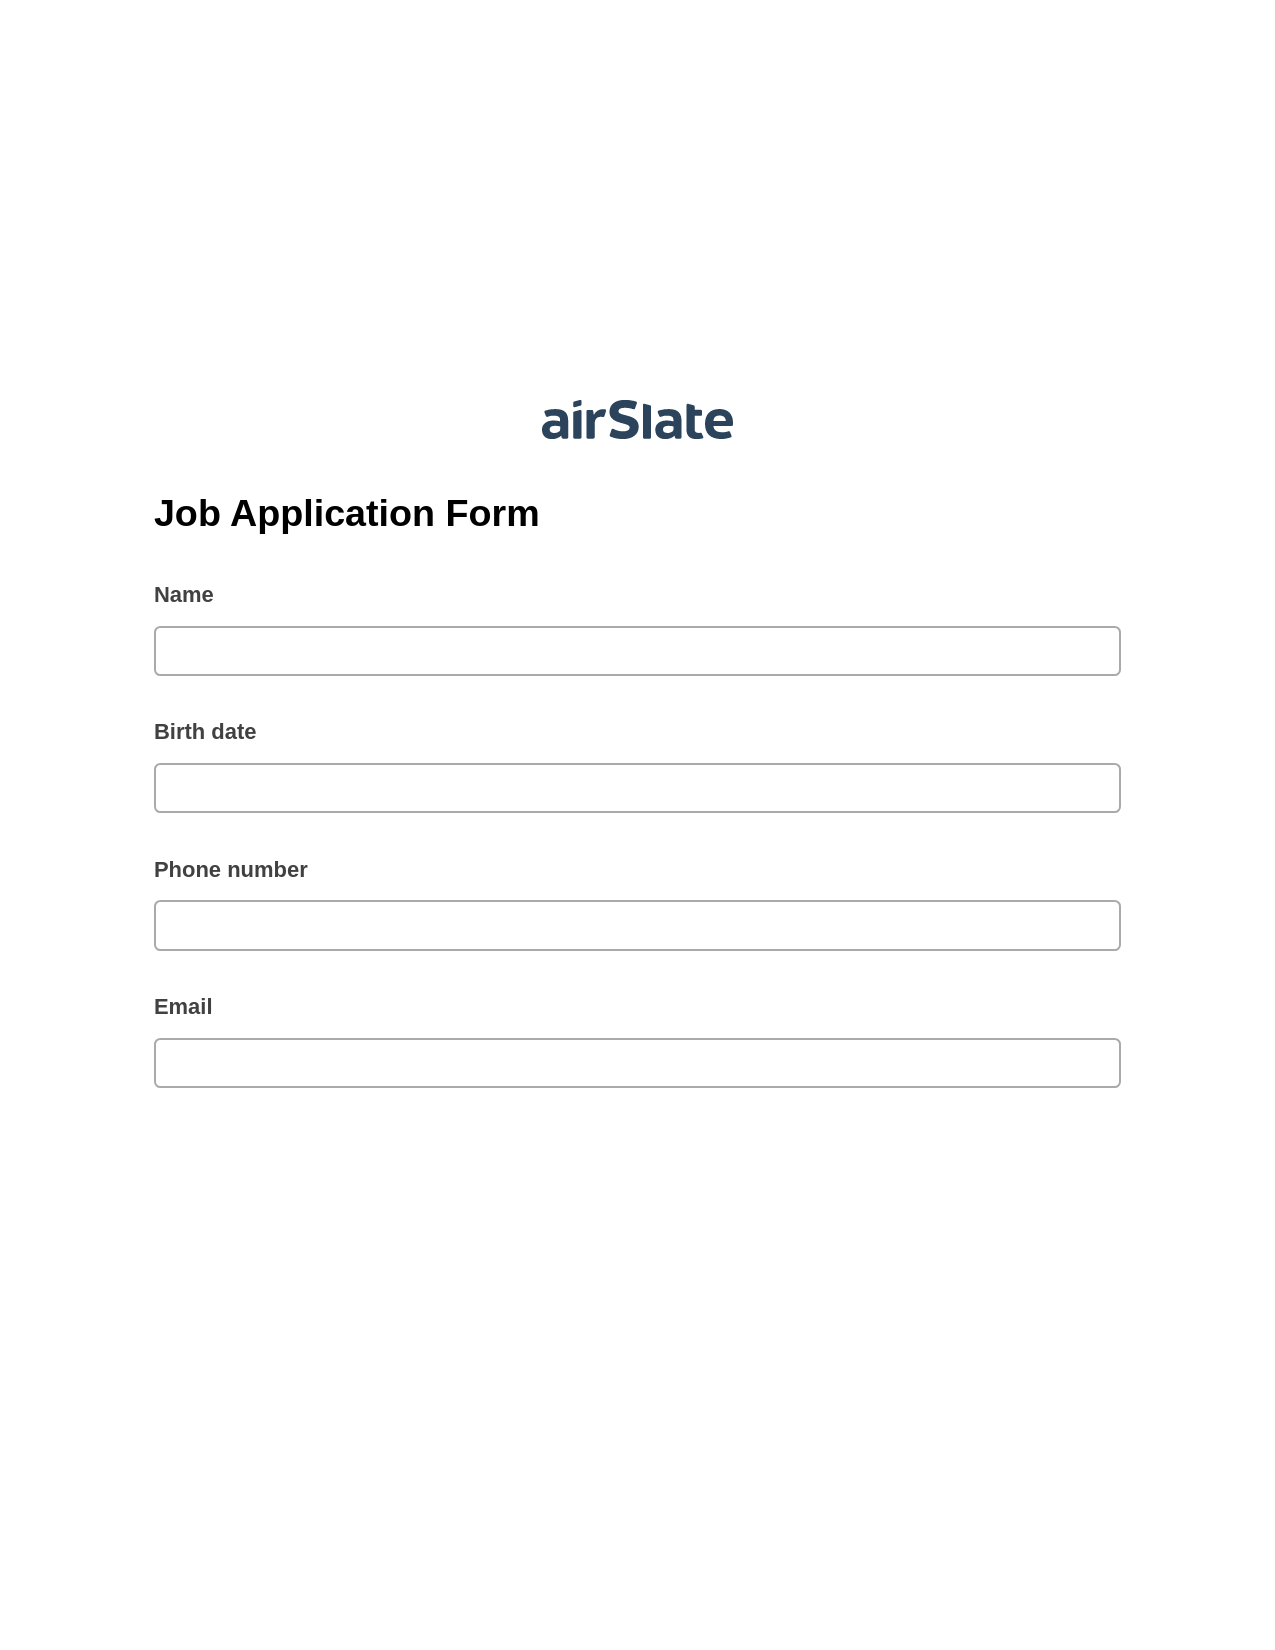 Multirole Job Application Form Pre-fill Document Bot, Text Message Notification Bot, Export to Formstack Documents Bot